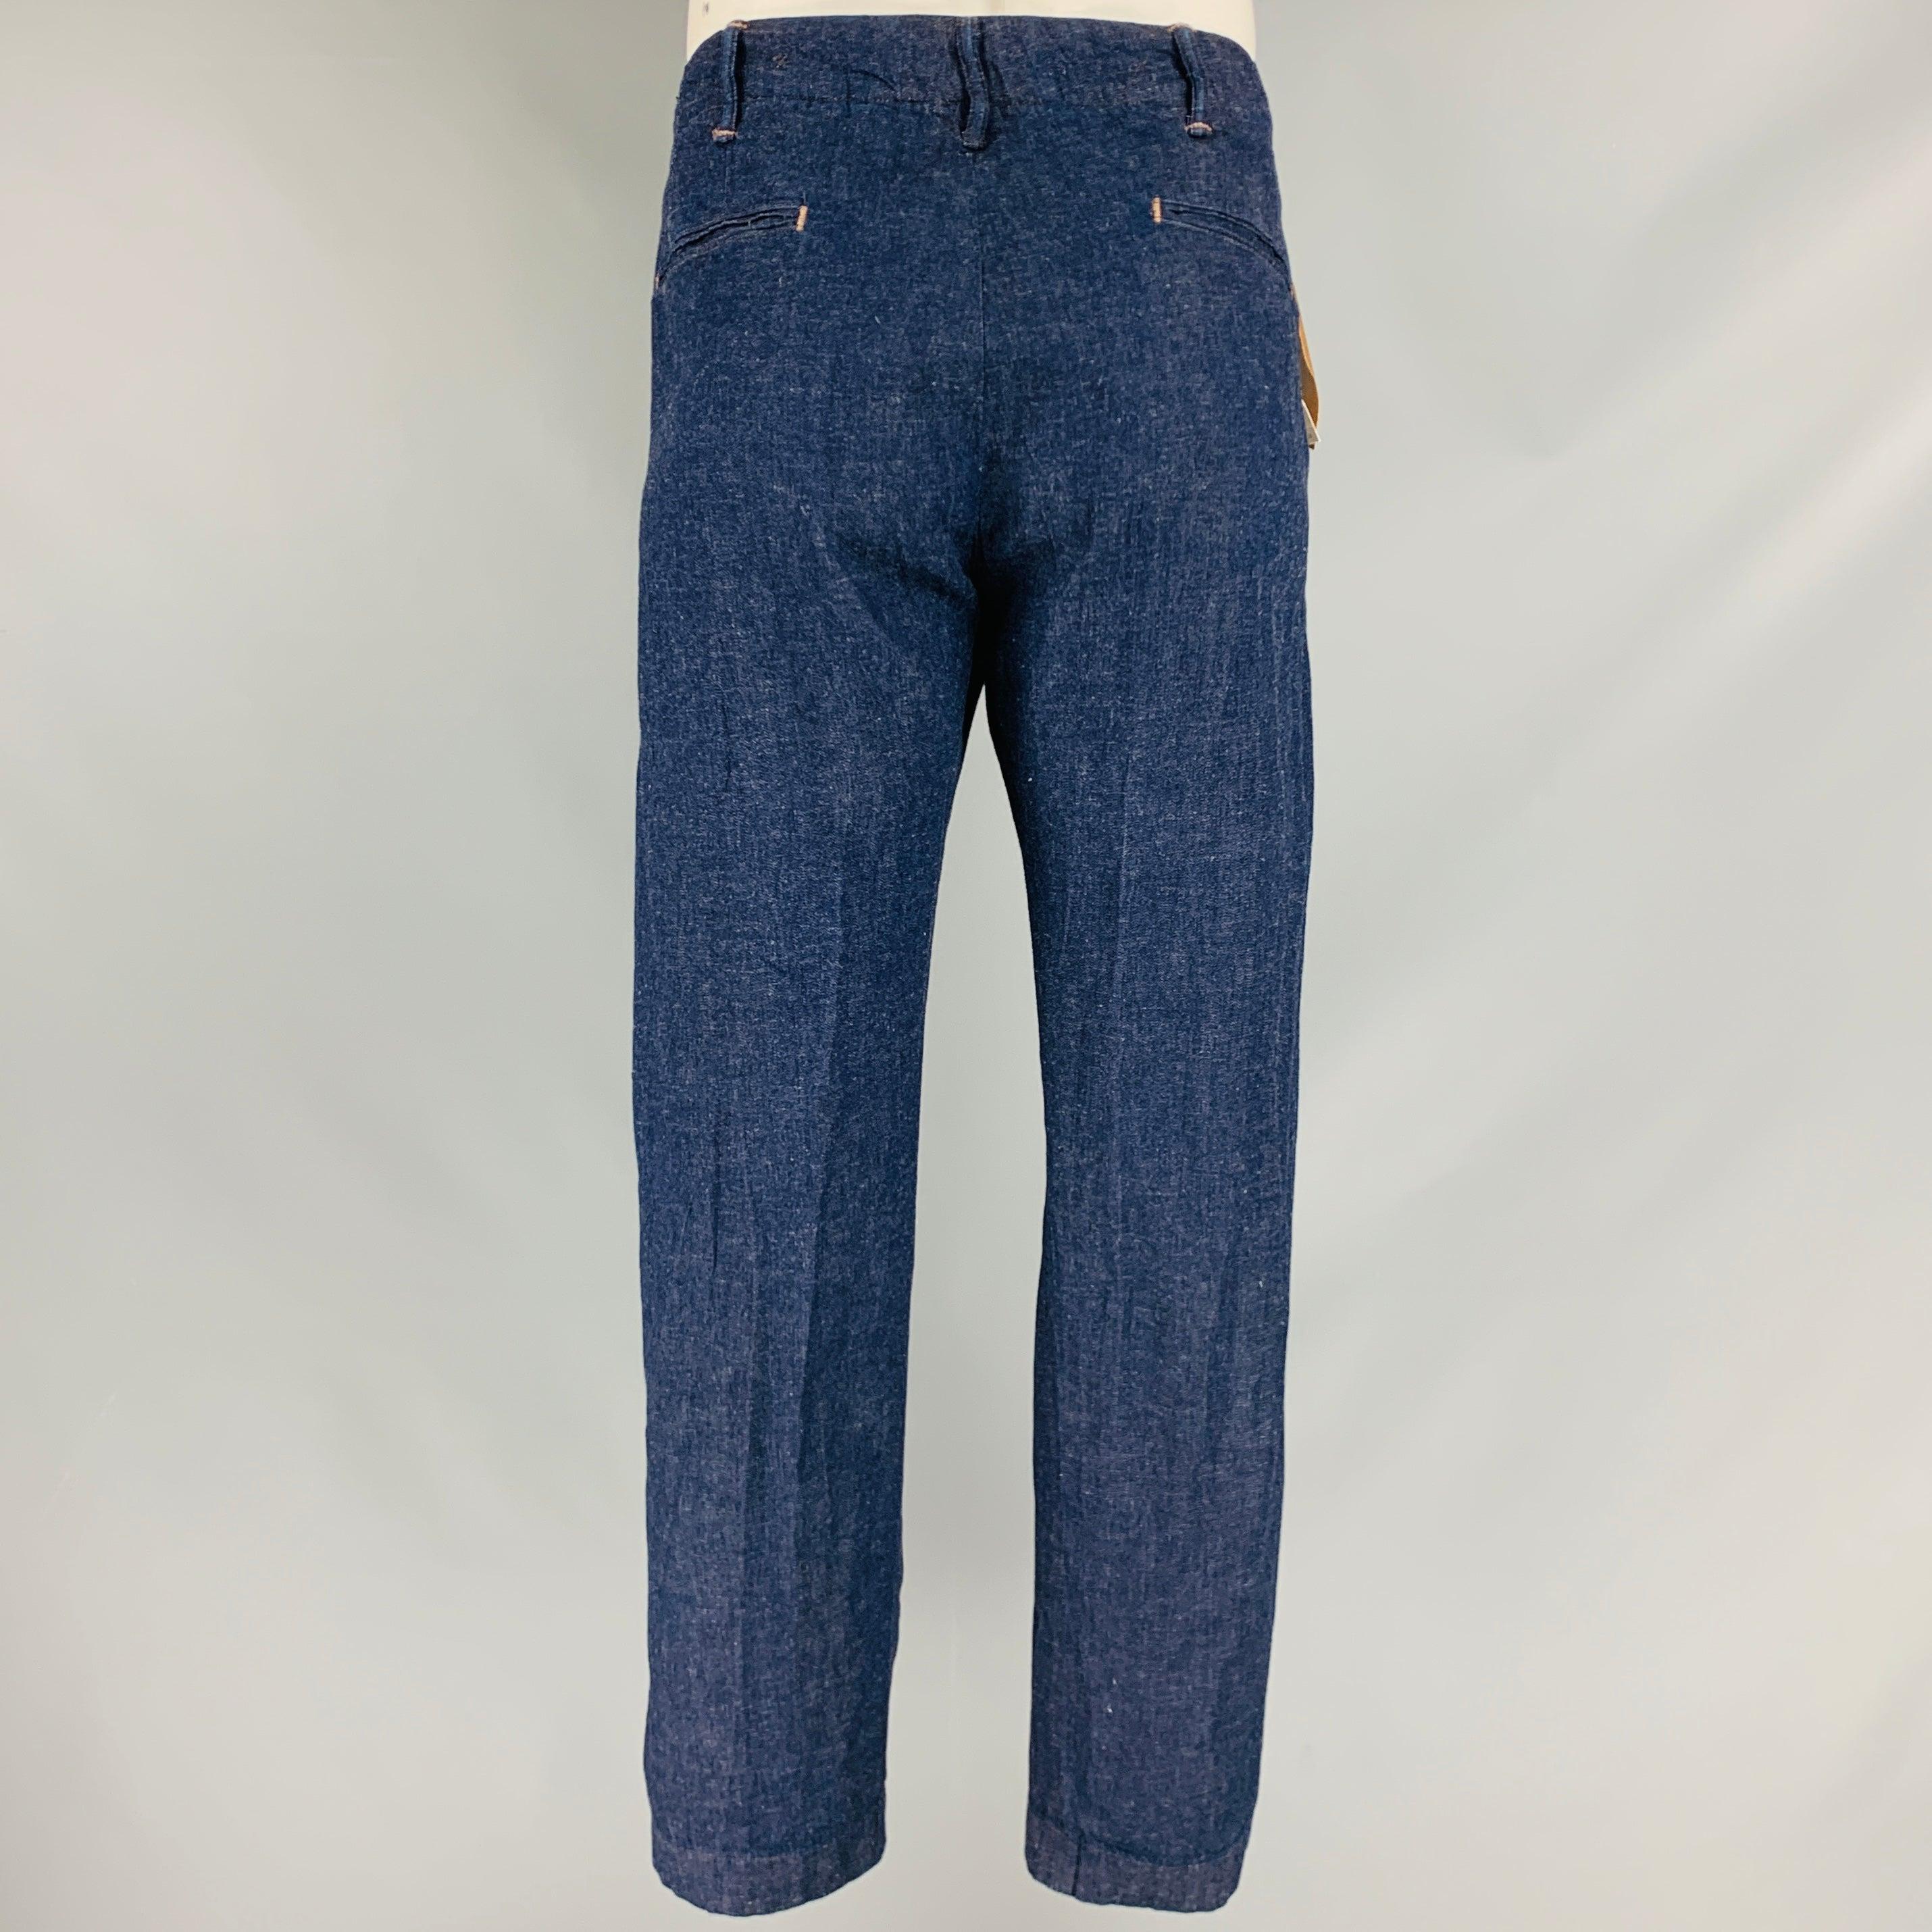 RRL by RALPH LAUREN Size 36 Indigo Cotton Linen Button Fly Casual Pants In Excellent Condition For Sale In San Francisco, CA